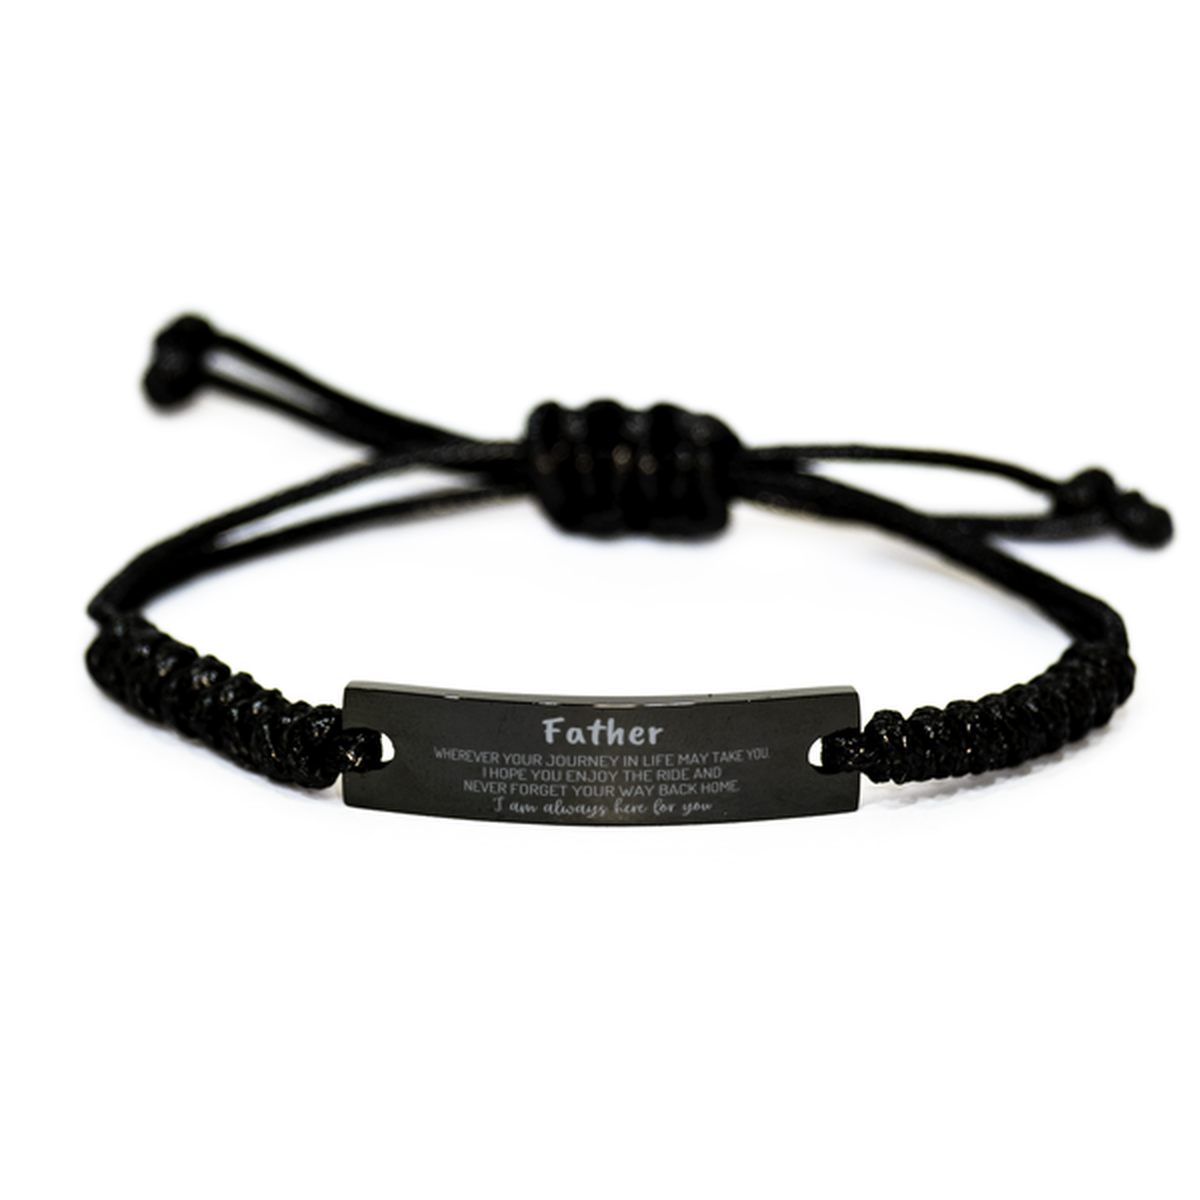 Father wherever your journey in life may take you, I am always here for you Father Black Rope Bracelet, Awesome Christmas Gifts For Father, Father Birthday Gifts for Men Women Family Loved One